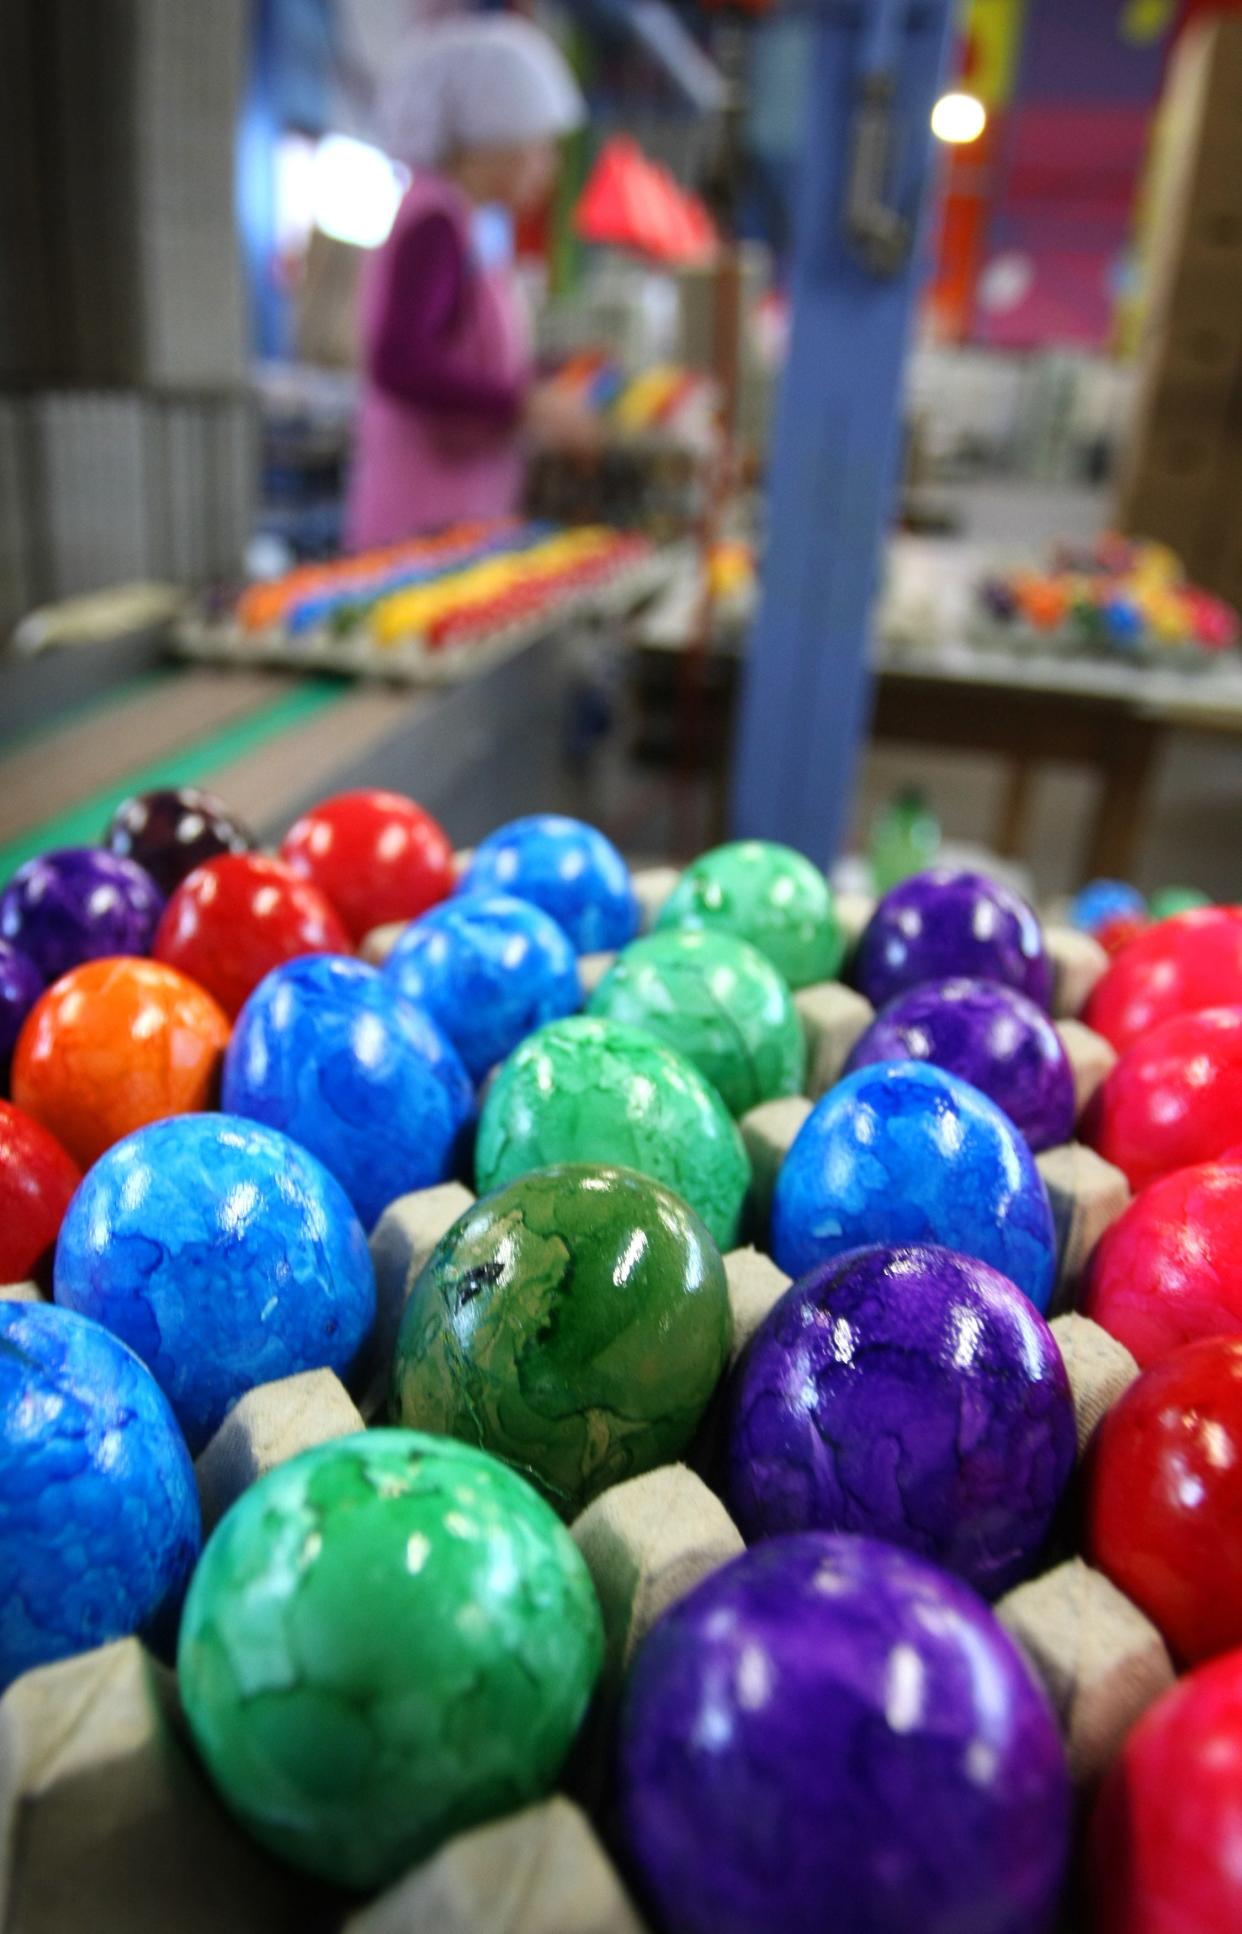 Colored eggs at the egg dye factory